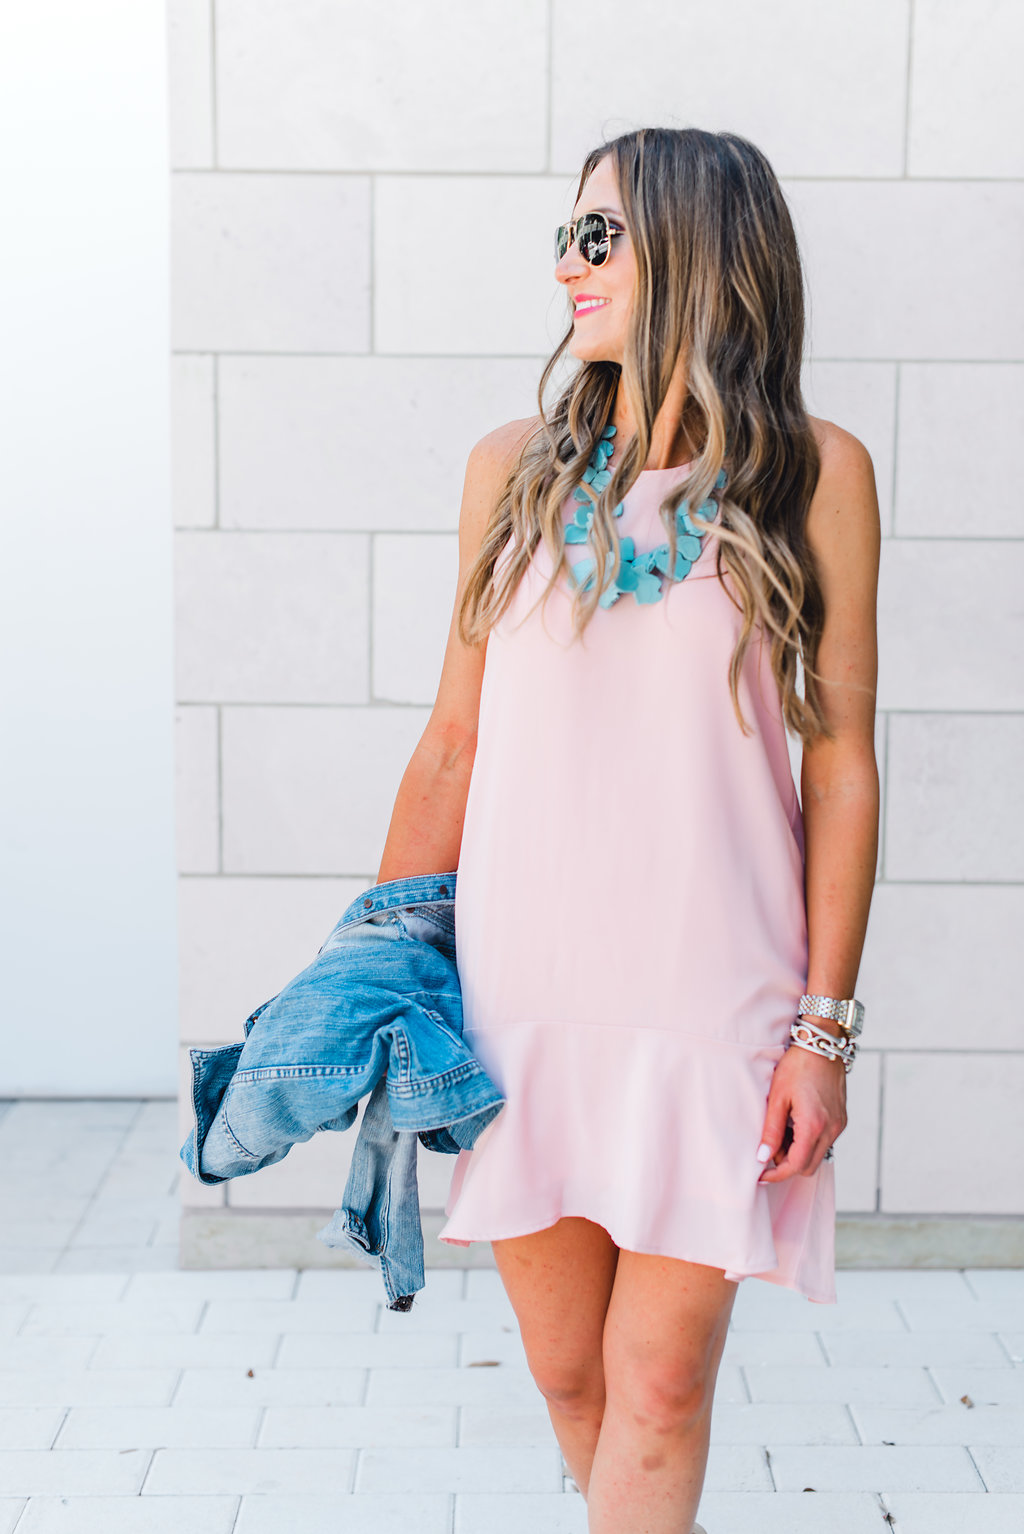 Pink ruffled racerback dress styled 3 ways - Pink Ruffle Dress Worn Three Ways! featured by popular Texas fashion blogger, Style Your Senses